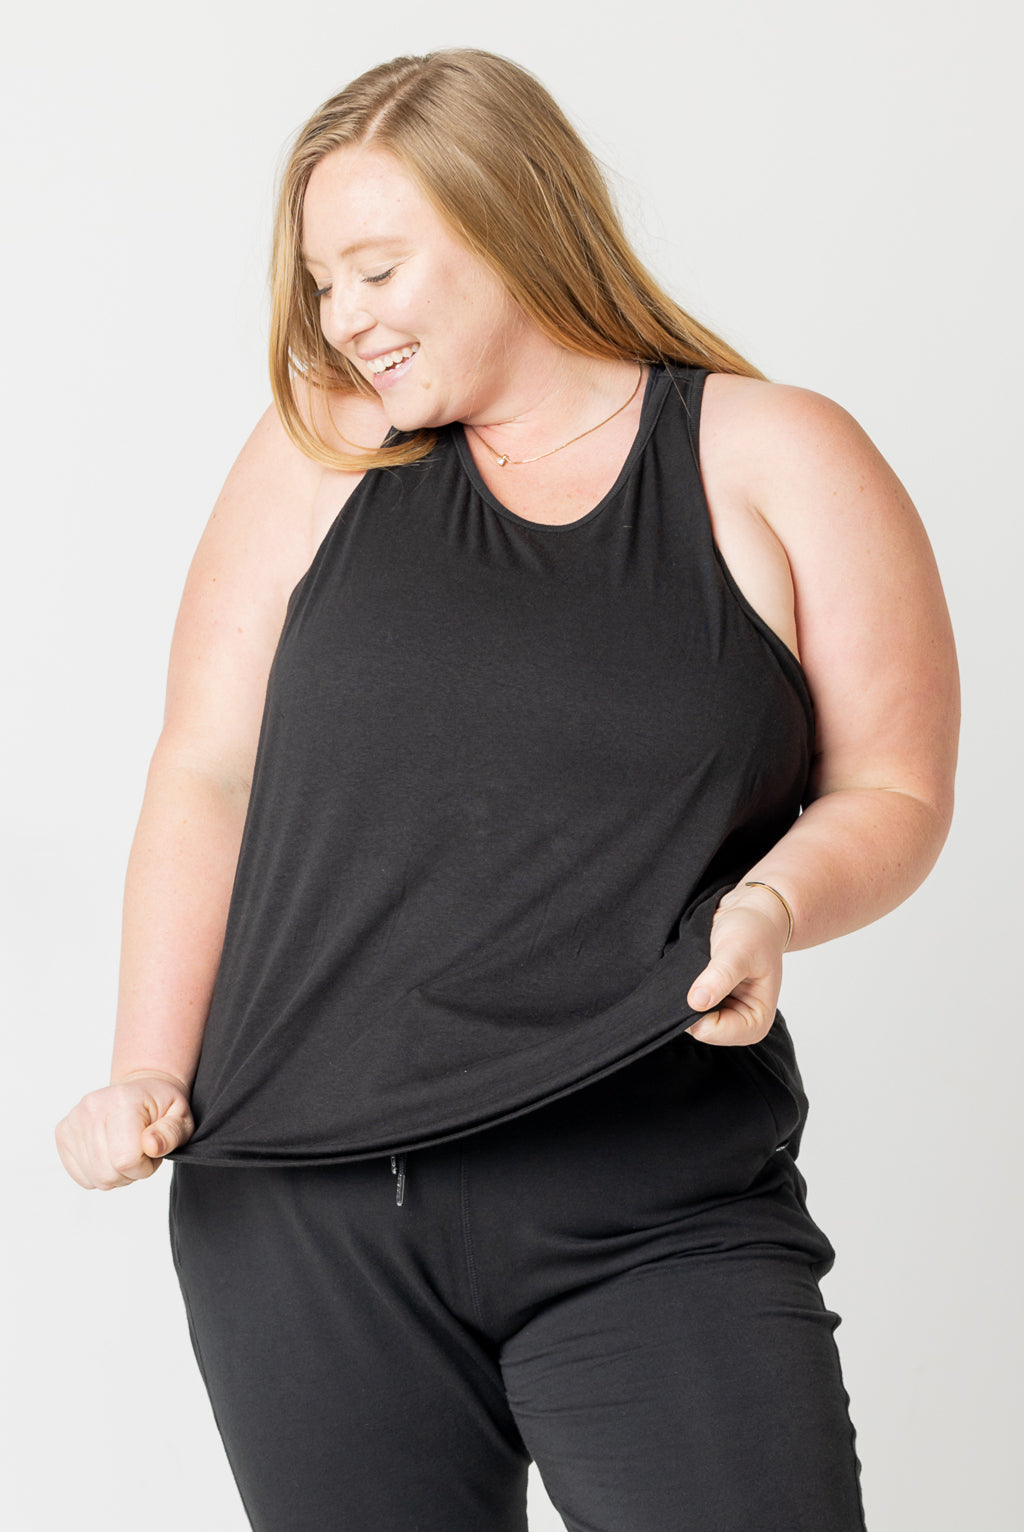 Plus size model in black ribbed tank top size 2X